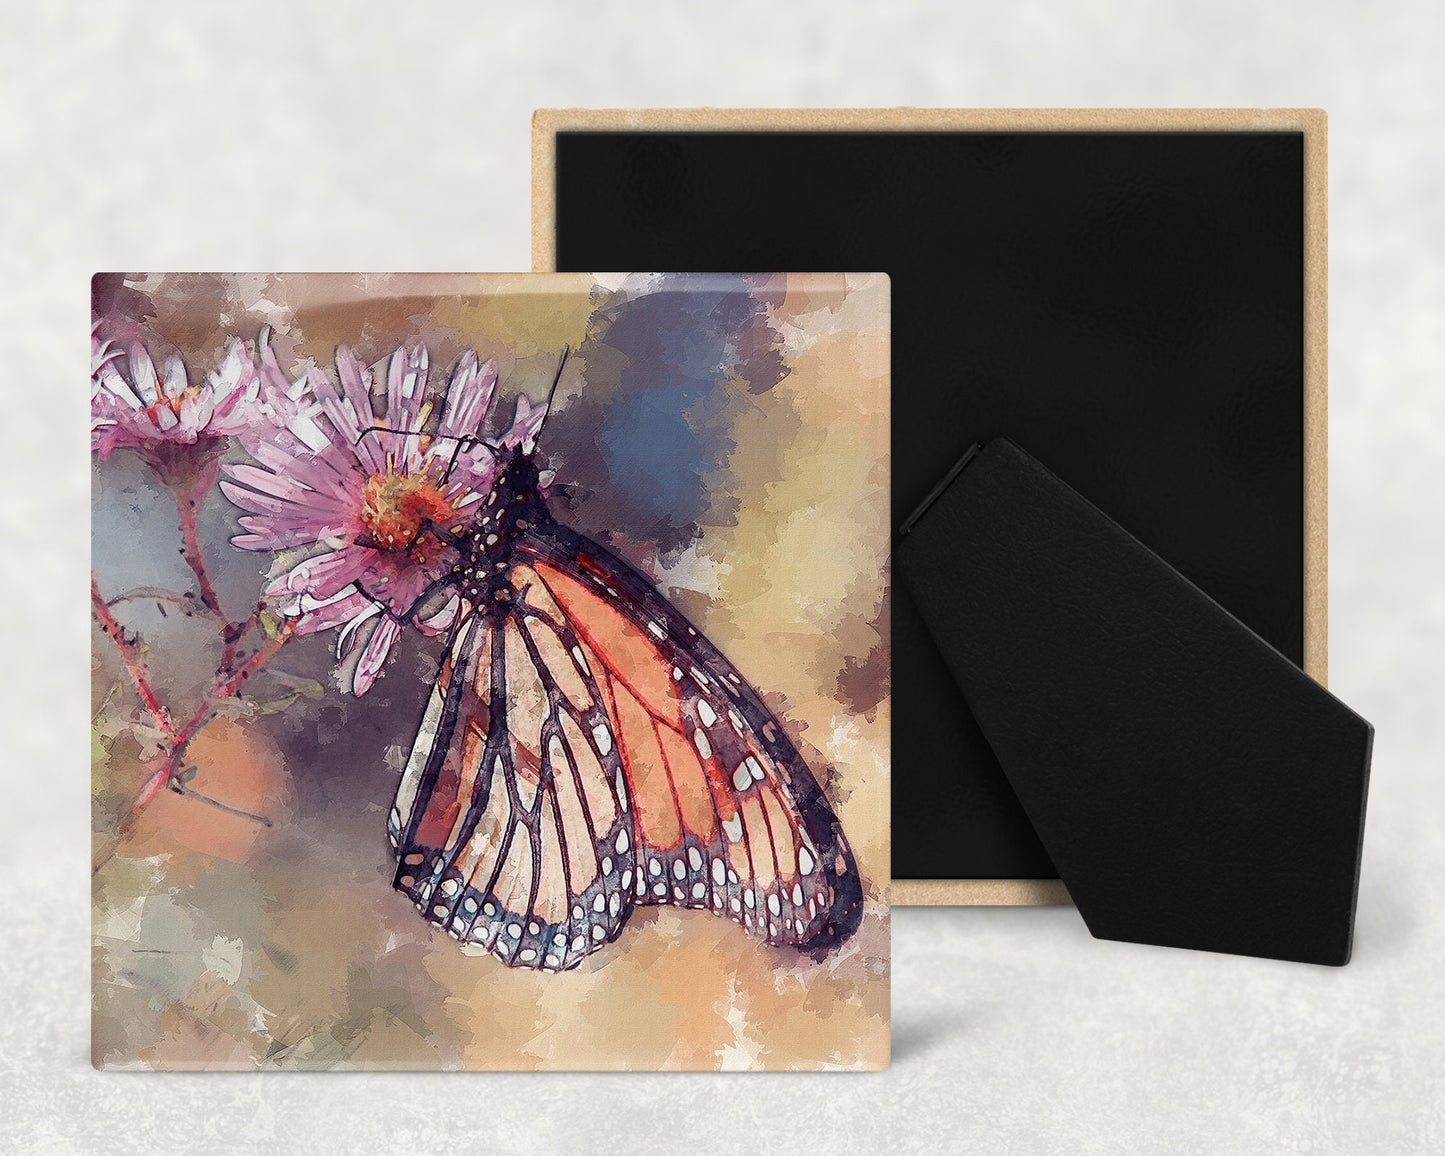 Monarch Butterfly Art Decorative Ceramic Tile with Optional Easel Back - Available in 3 Sizes